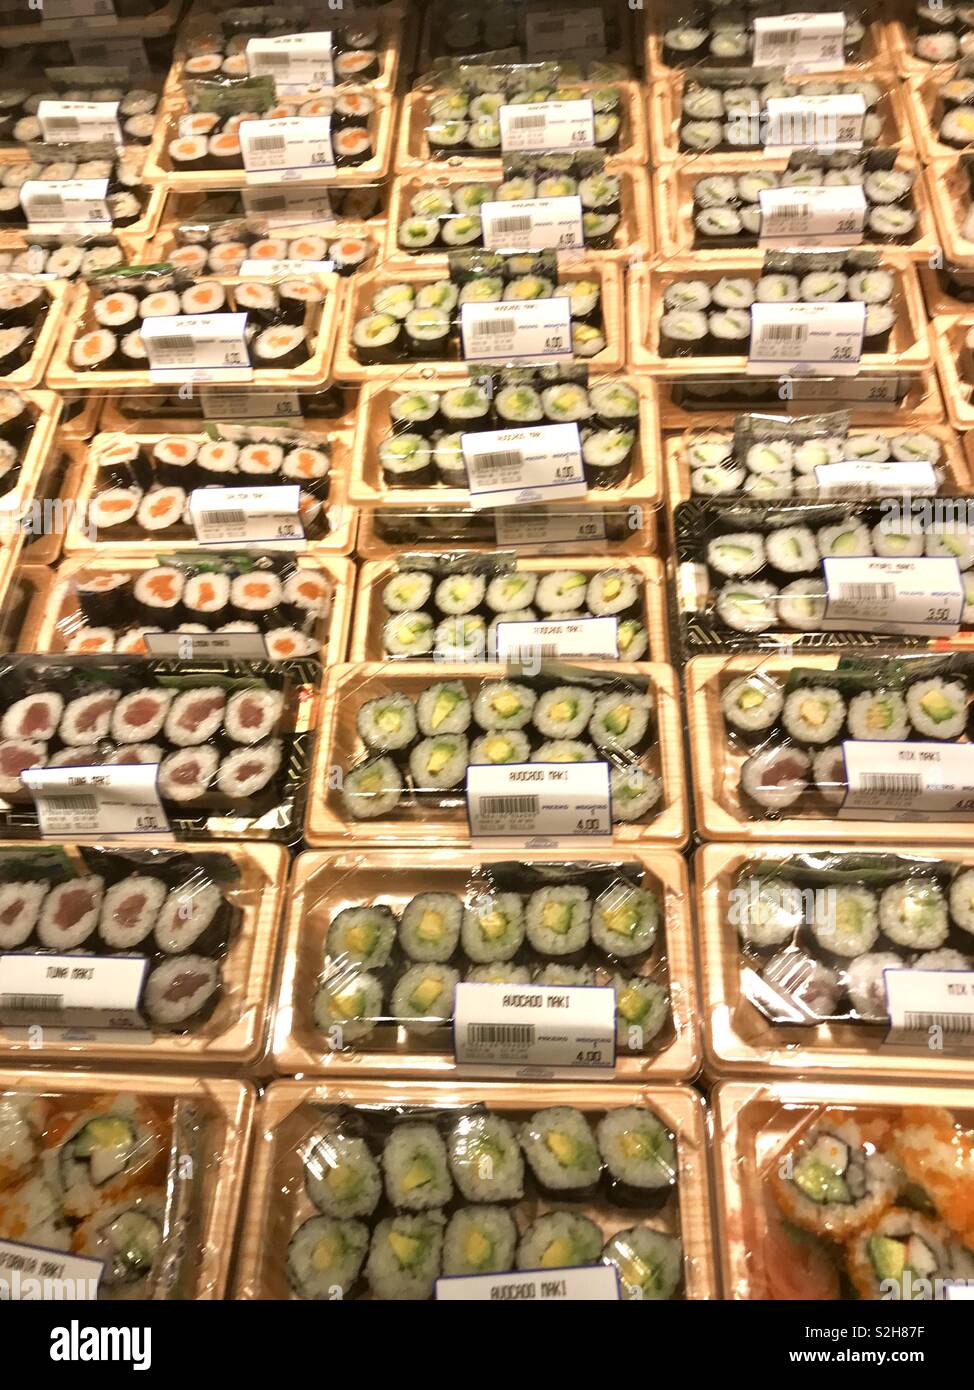 Sushi food display in a supermarket Stock Photo